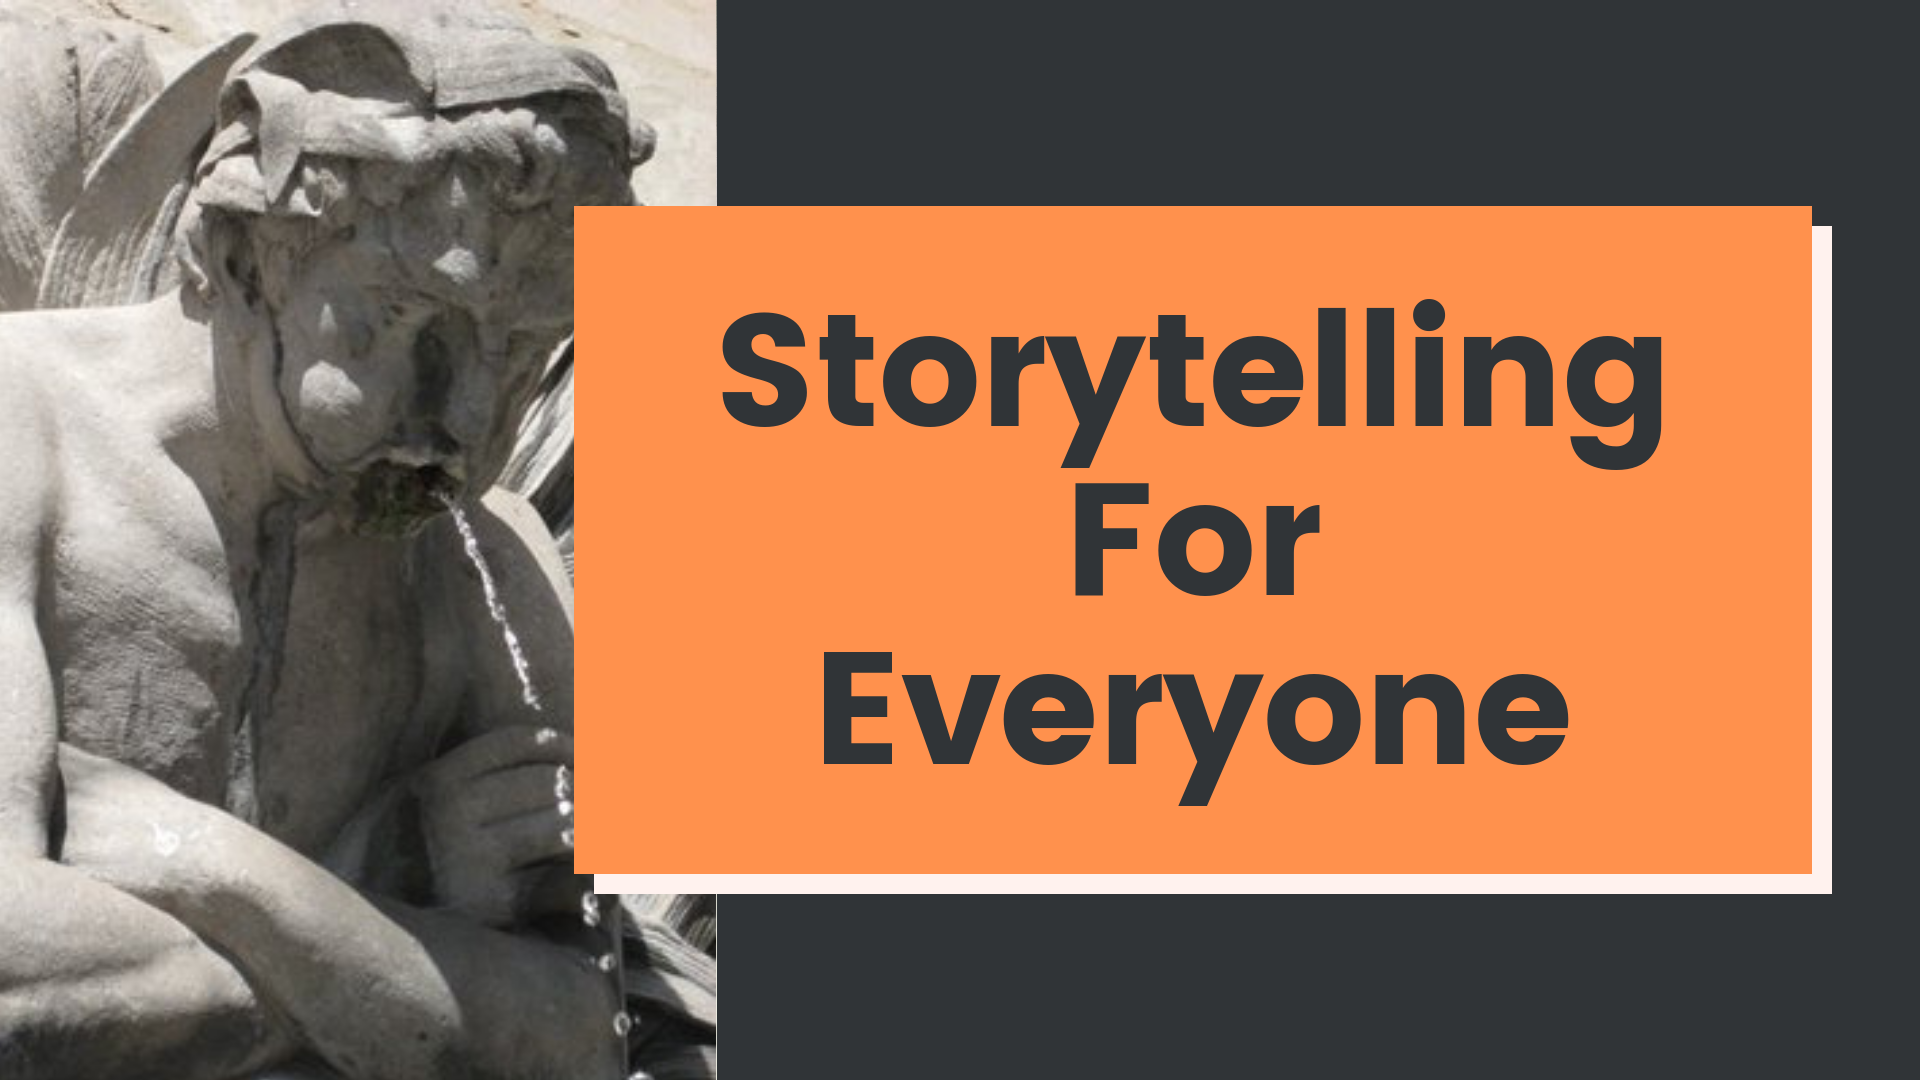 Storytelling For Everyone: A Four Week Course in Personal Narrative (September 2019)